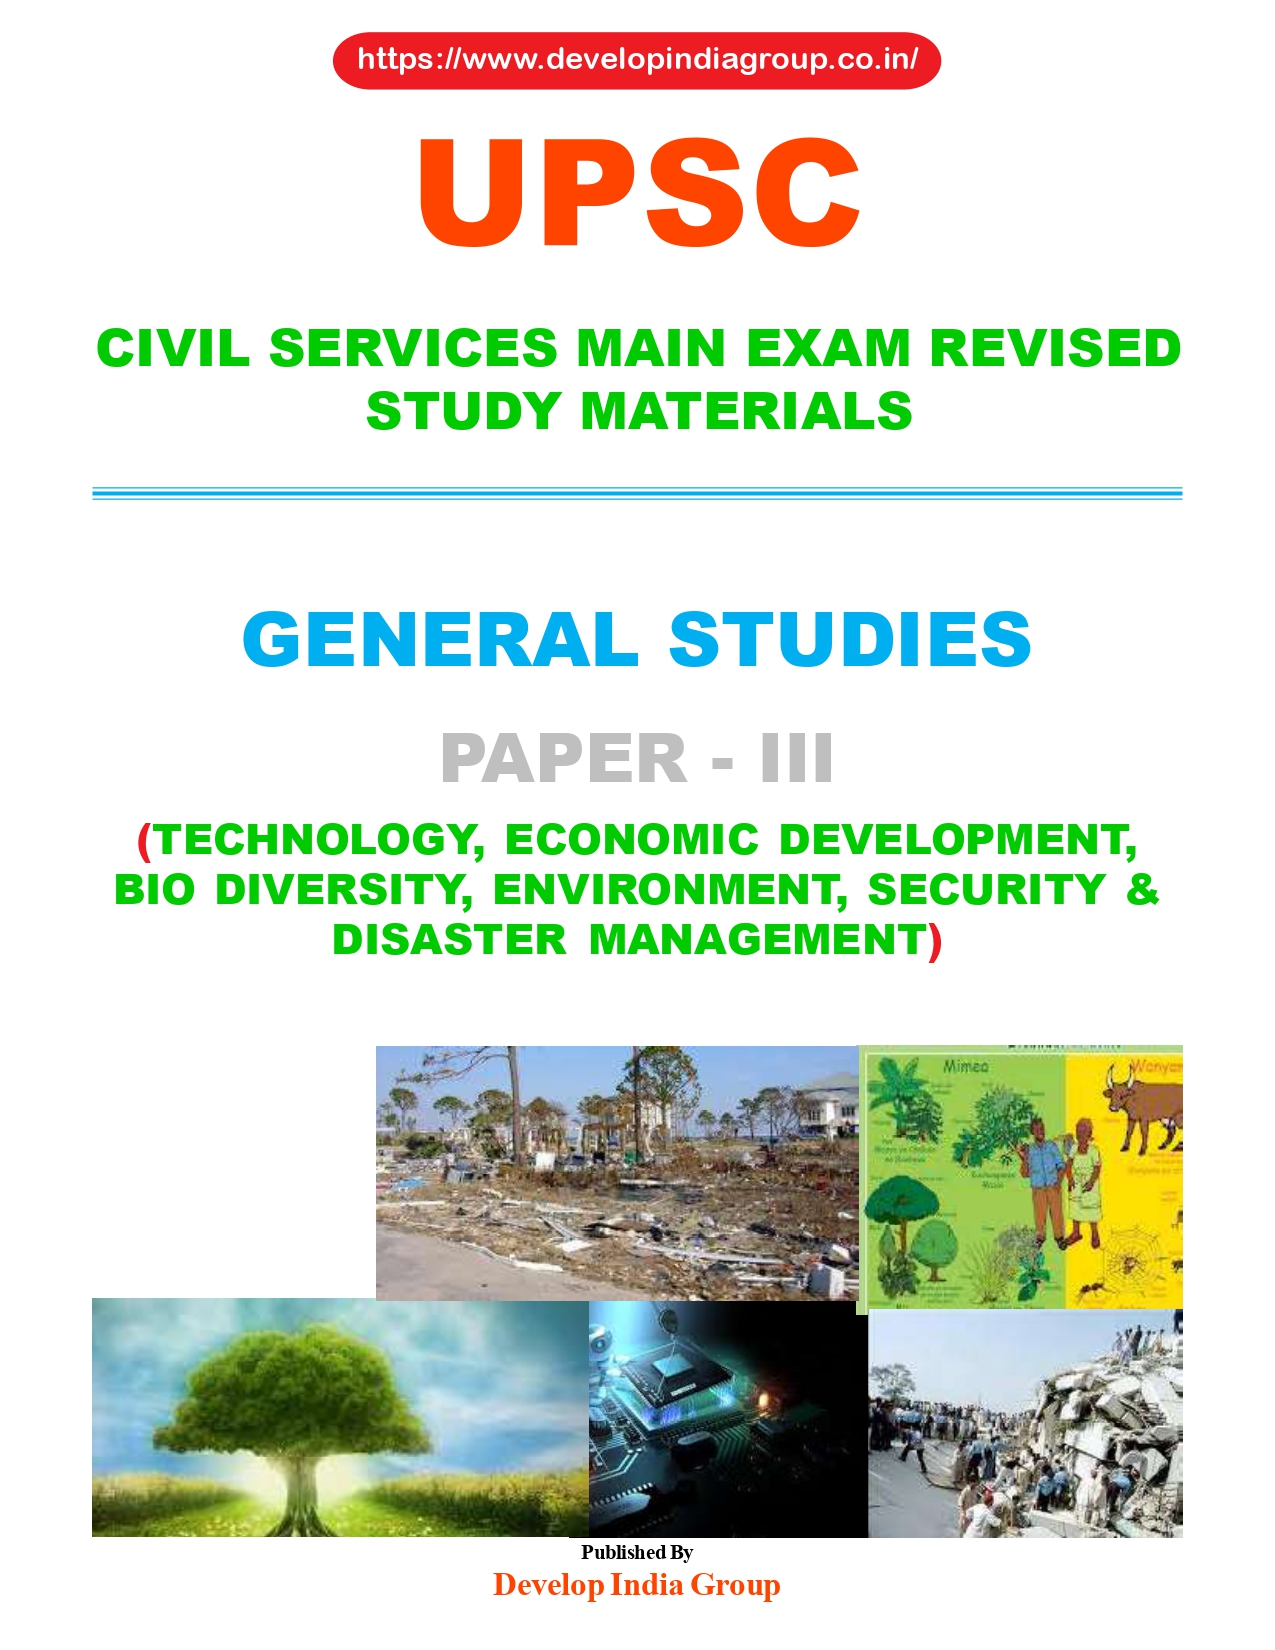 Technology Economic Development Bio diversity Environment security and disaster management cover